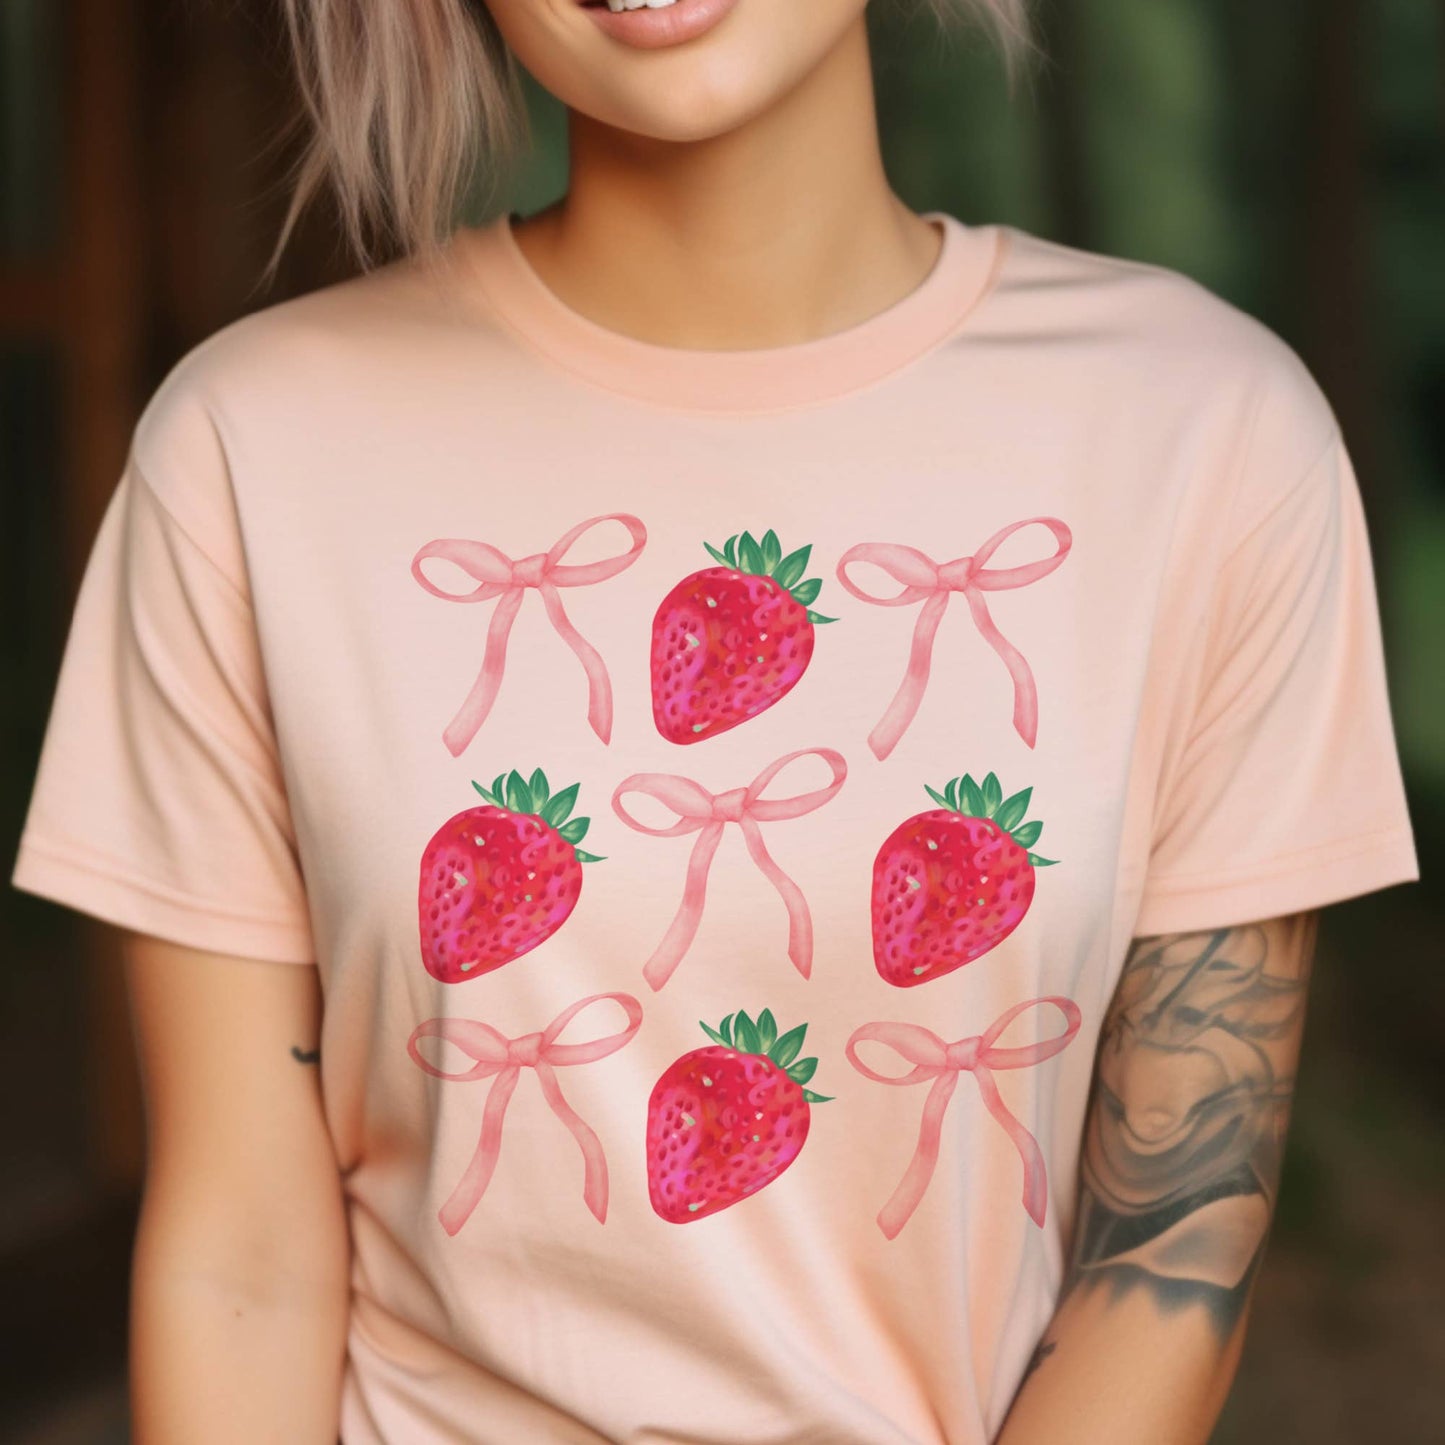 Coquette Tee Strawberry and Bows Summer Graphic Tshirt